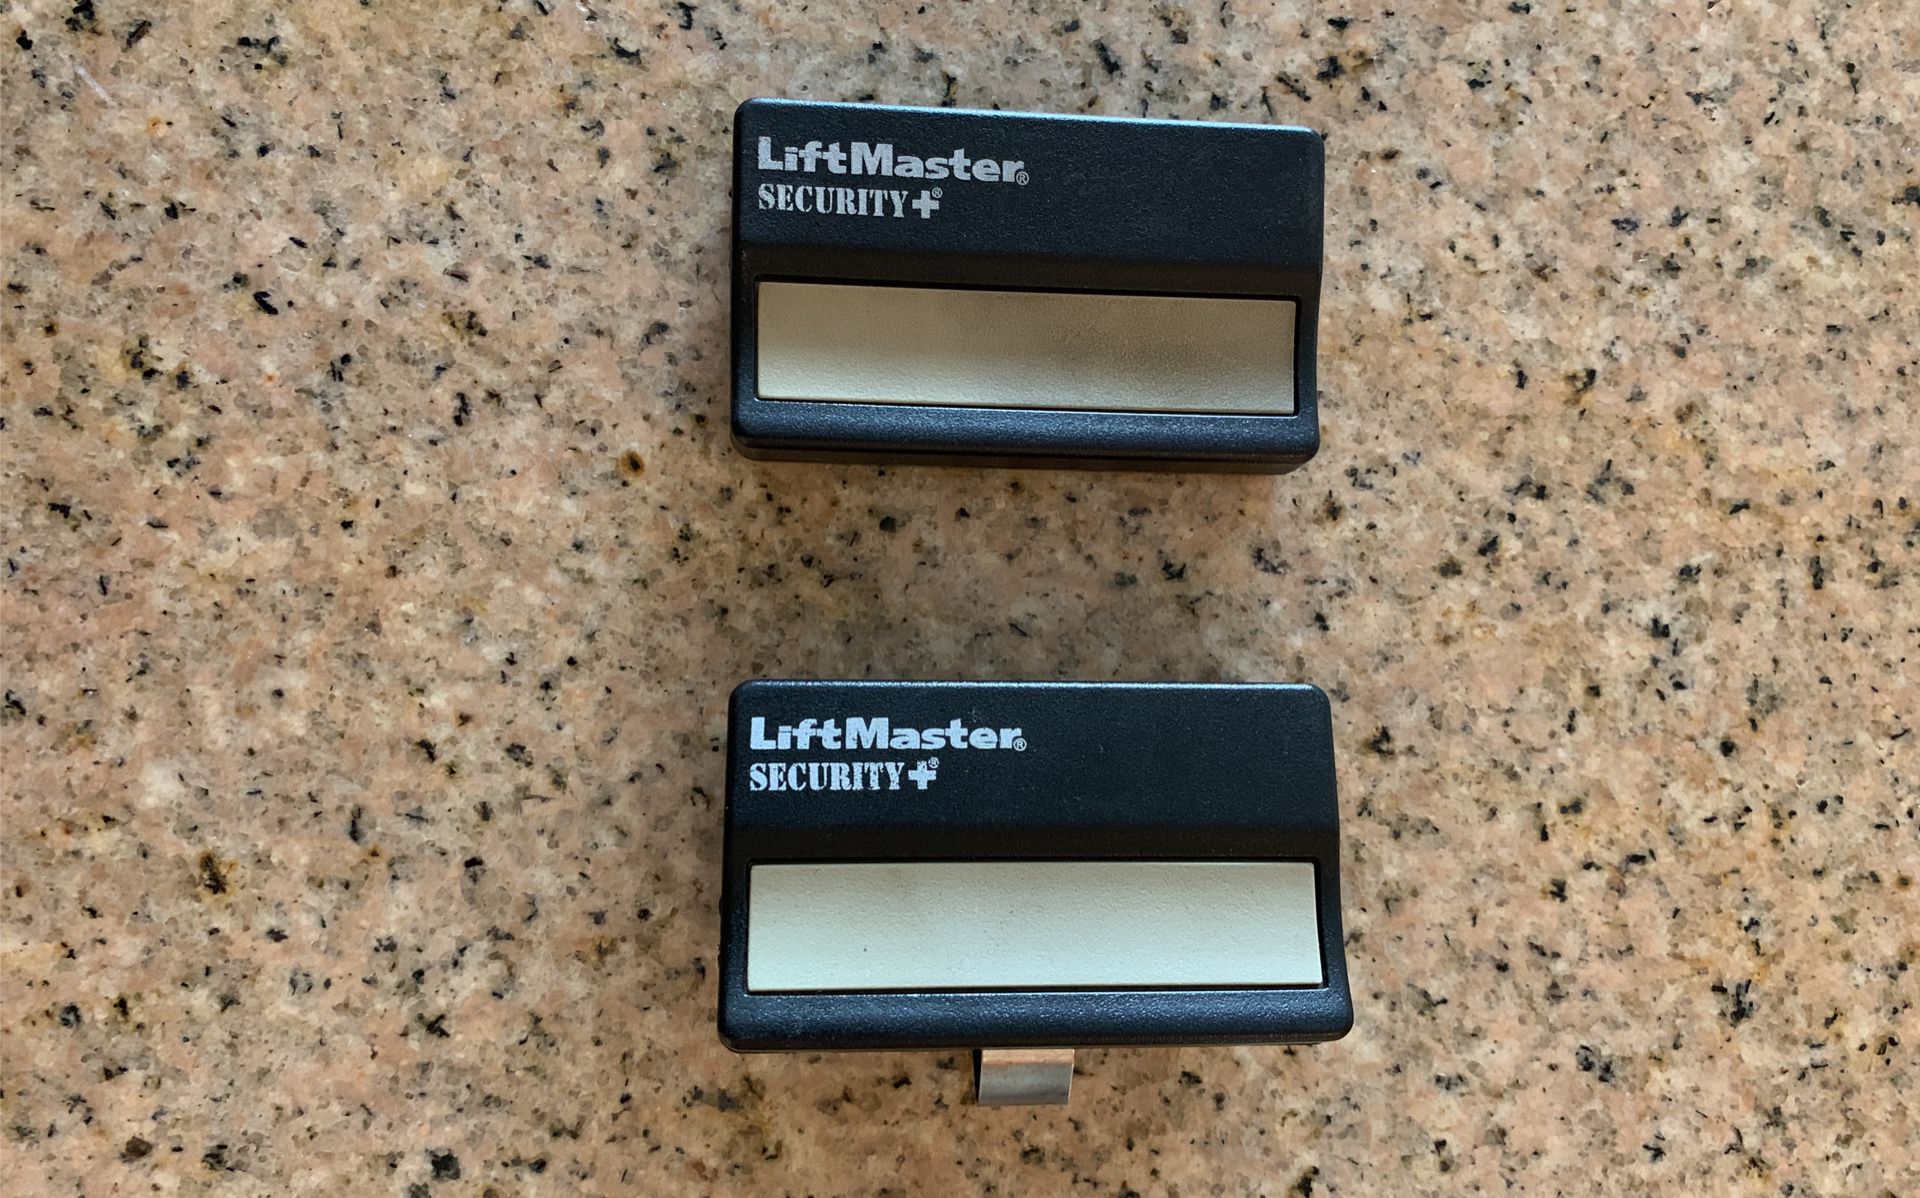 2 Liftmaster Security+ 971LM Remotes